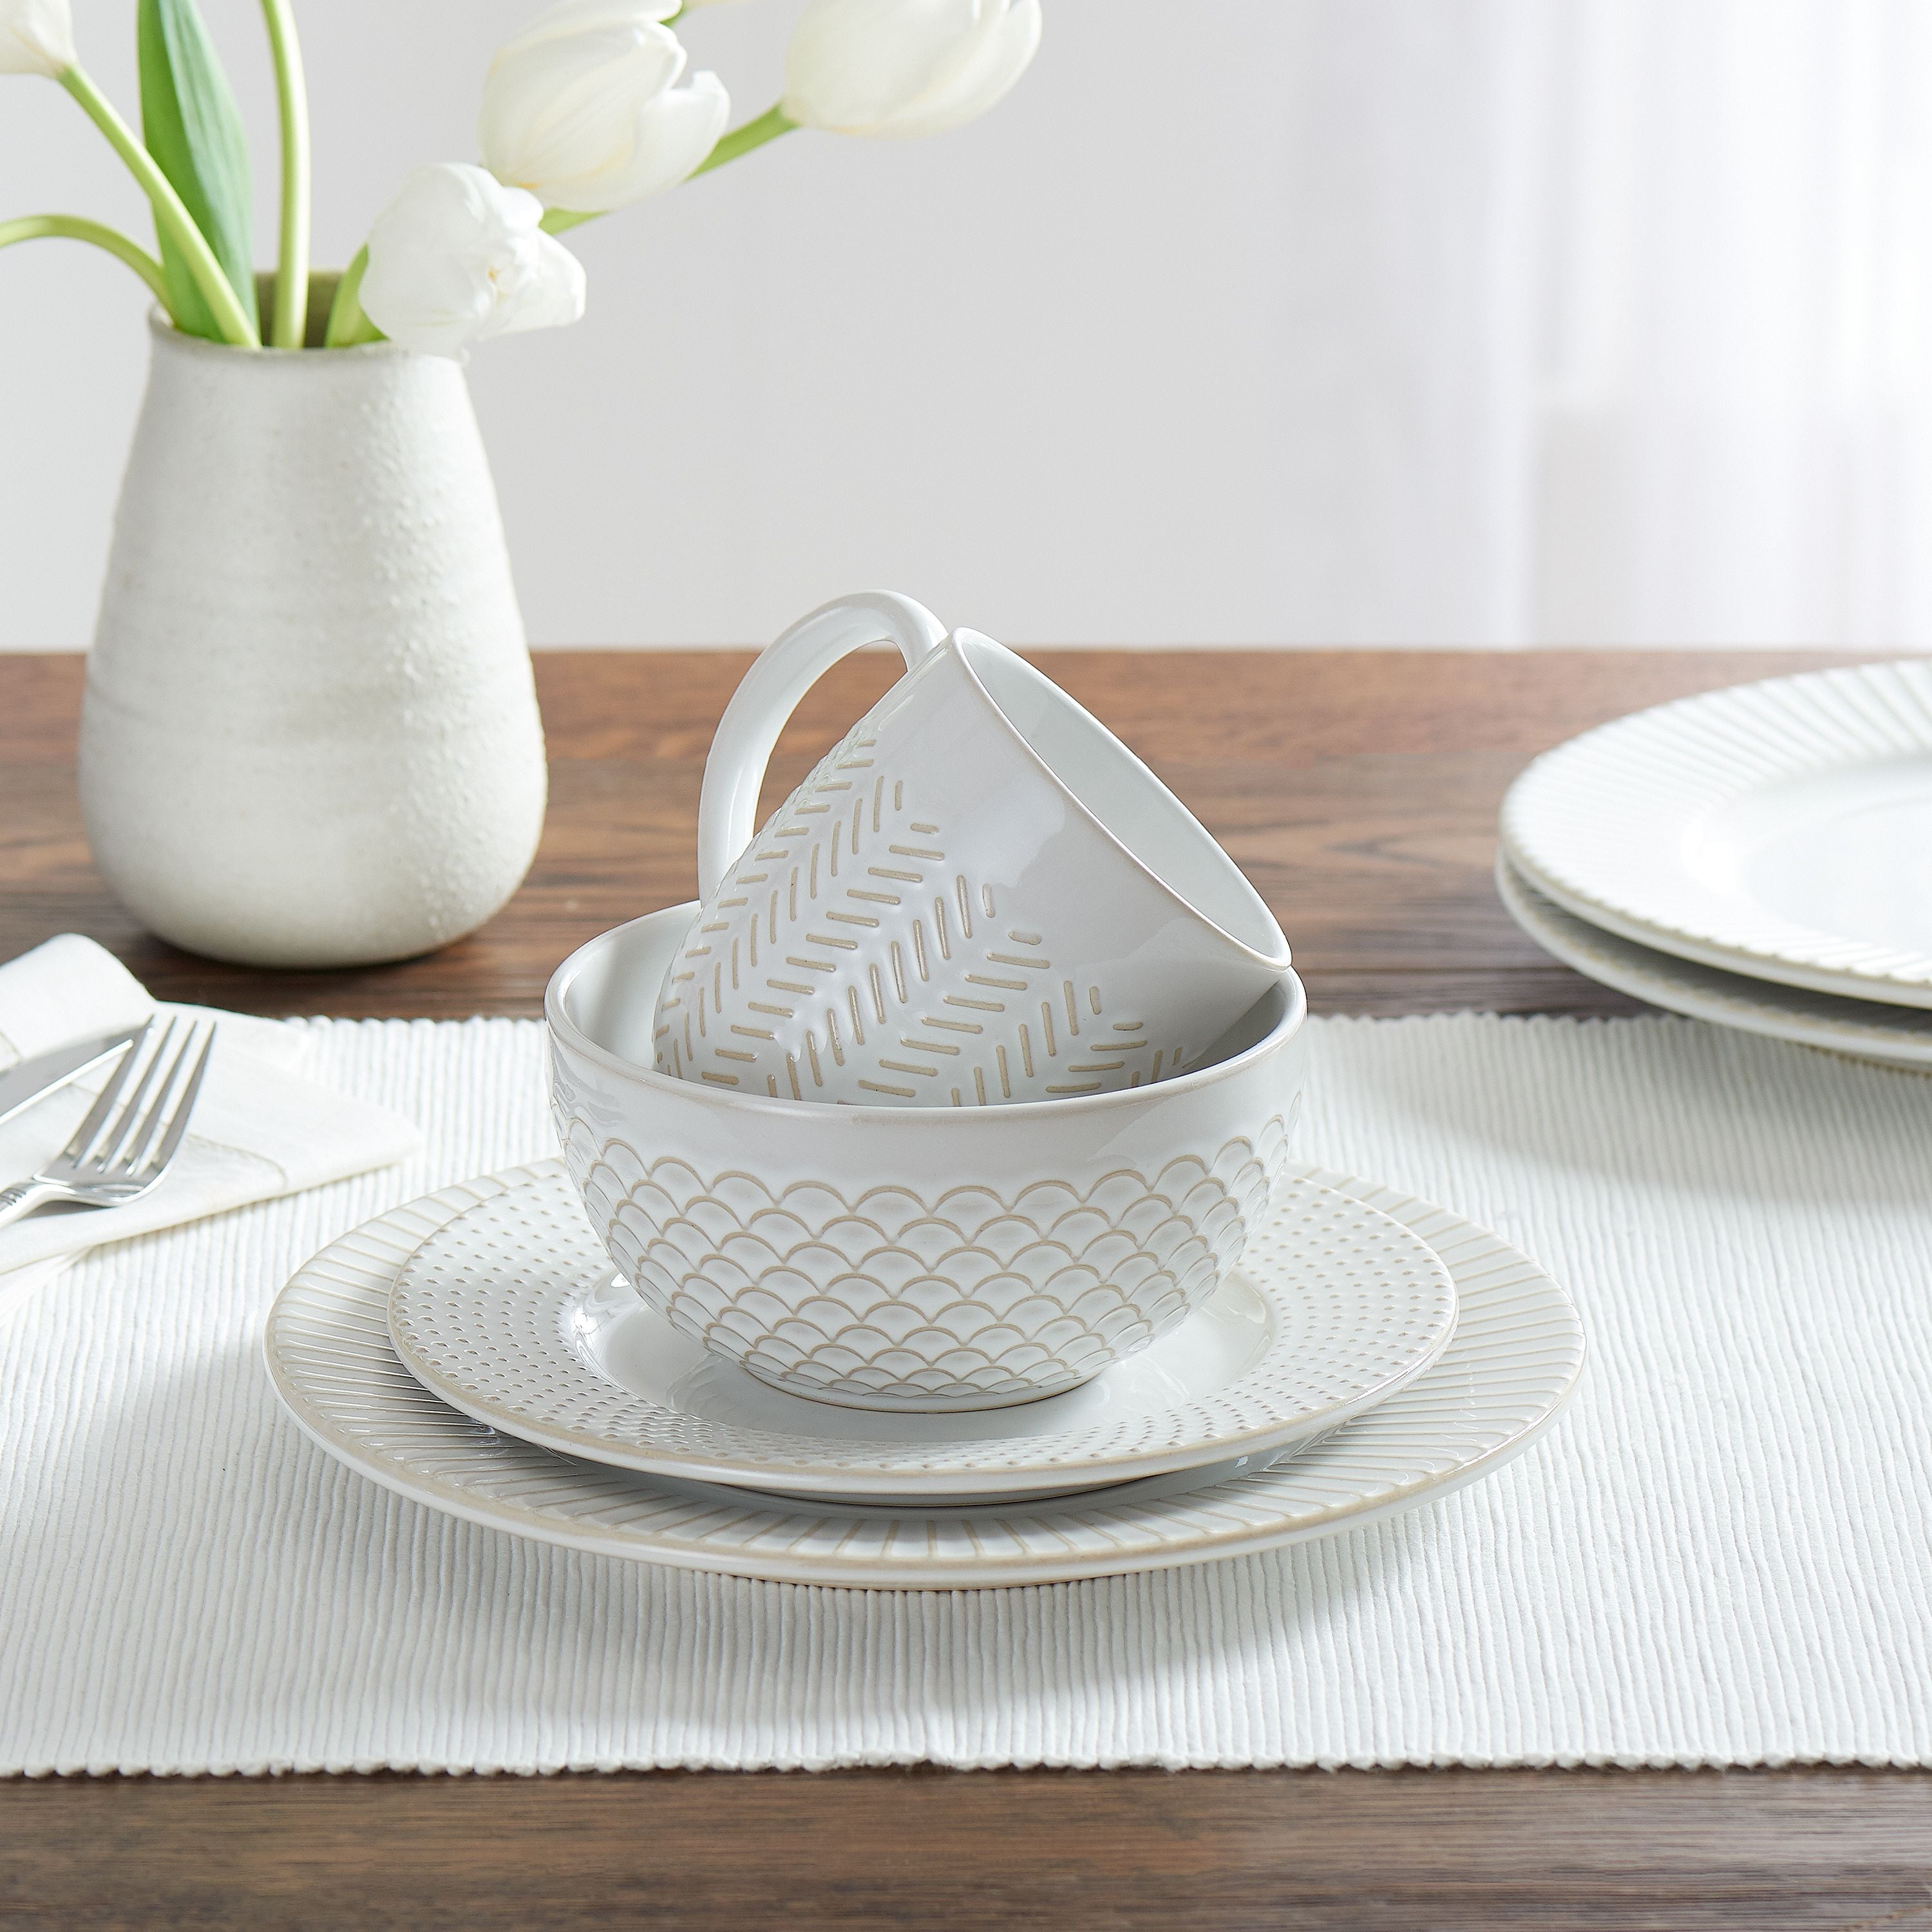 Better Homes And Gardens Dish Sets, Better Homes And Gardens Dinnerware Patterns